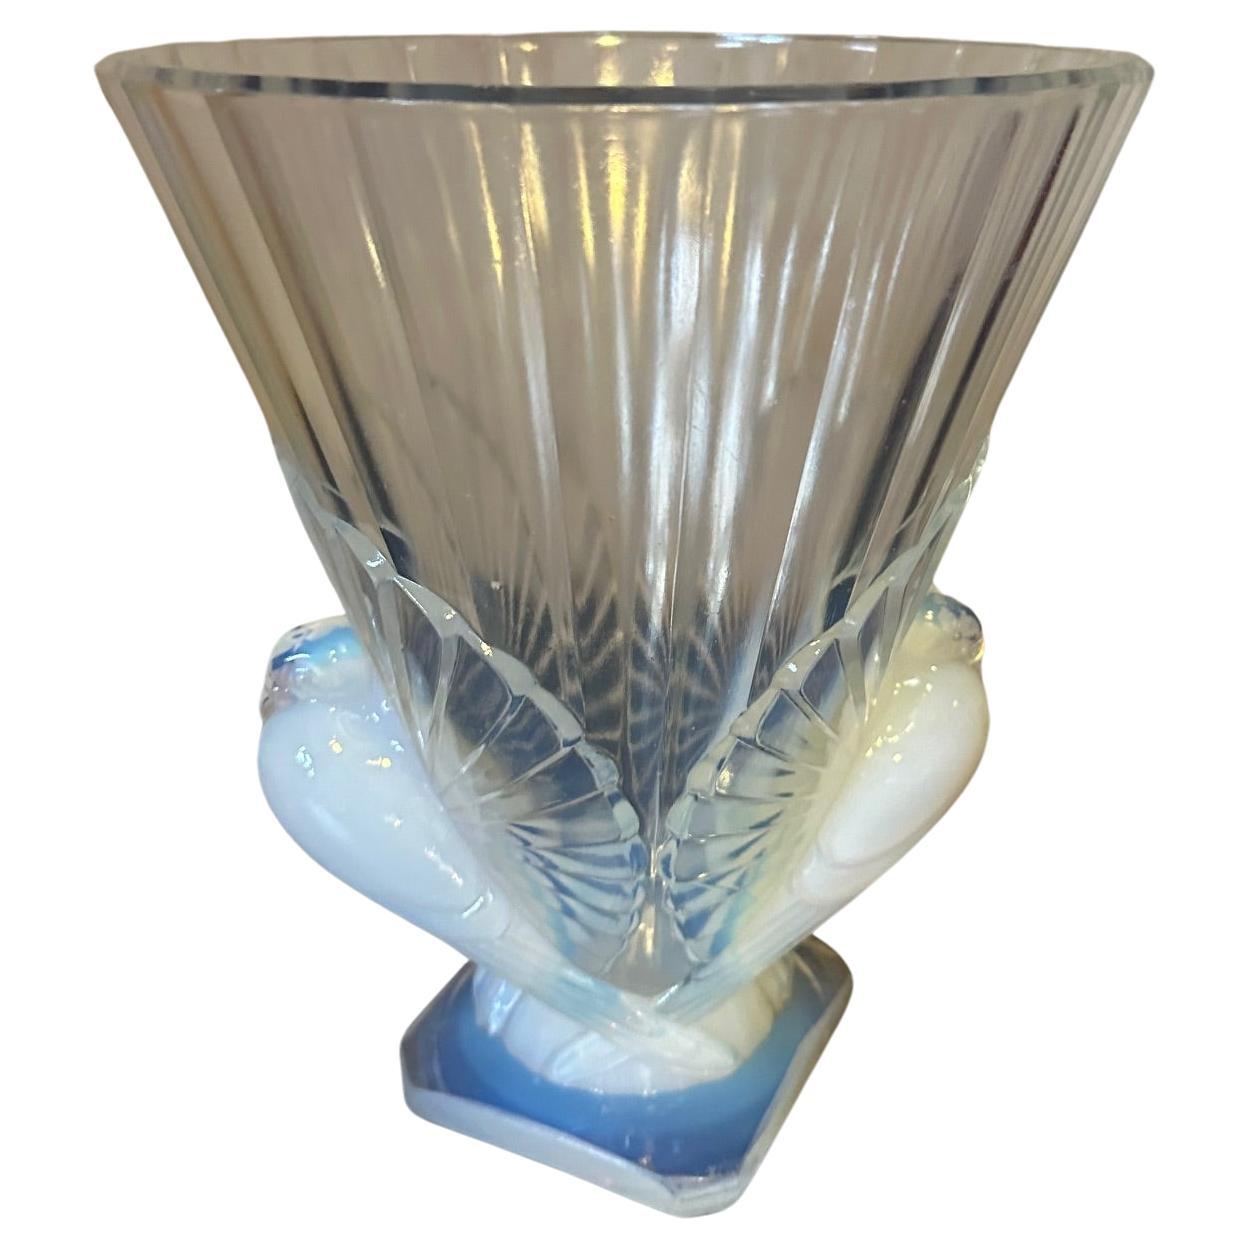 20th century French Art Deco Opalescent Glass Sabino Vase, 1930s For Sale